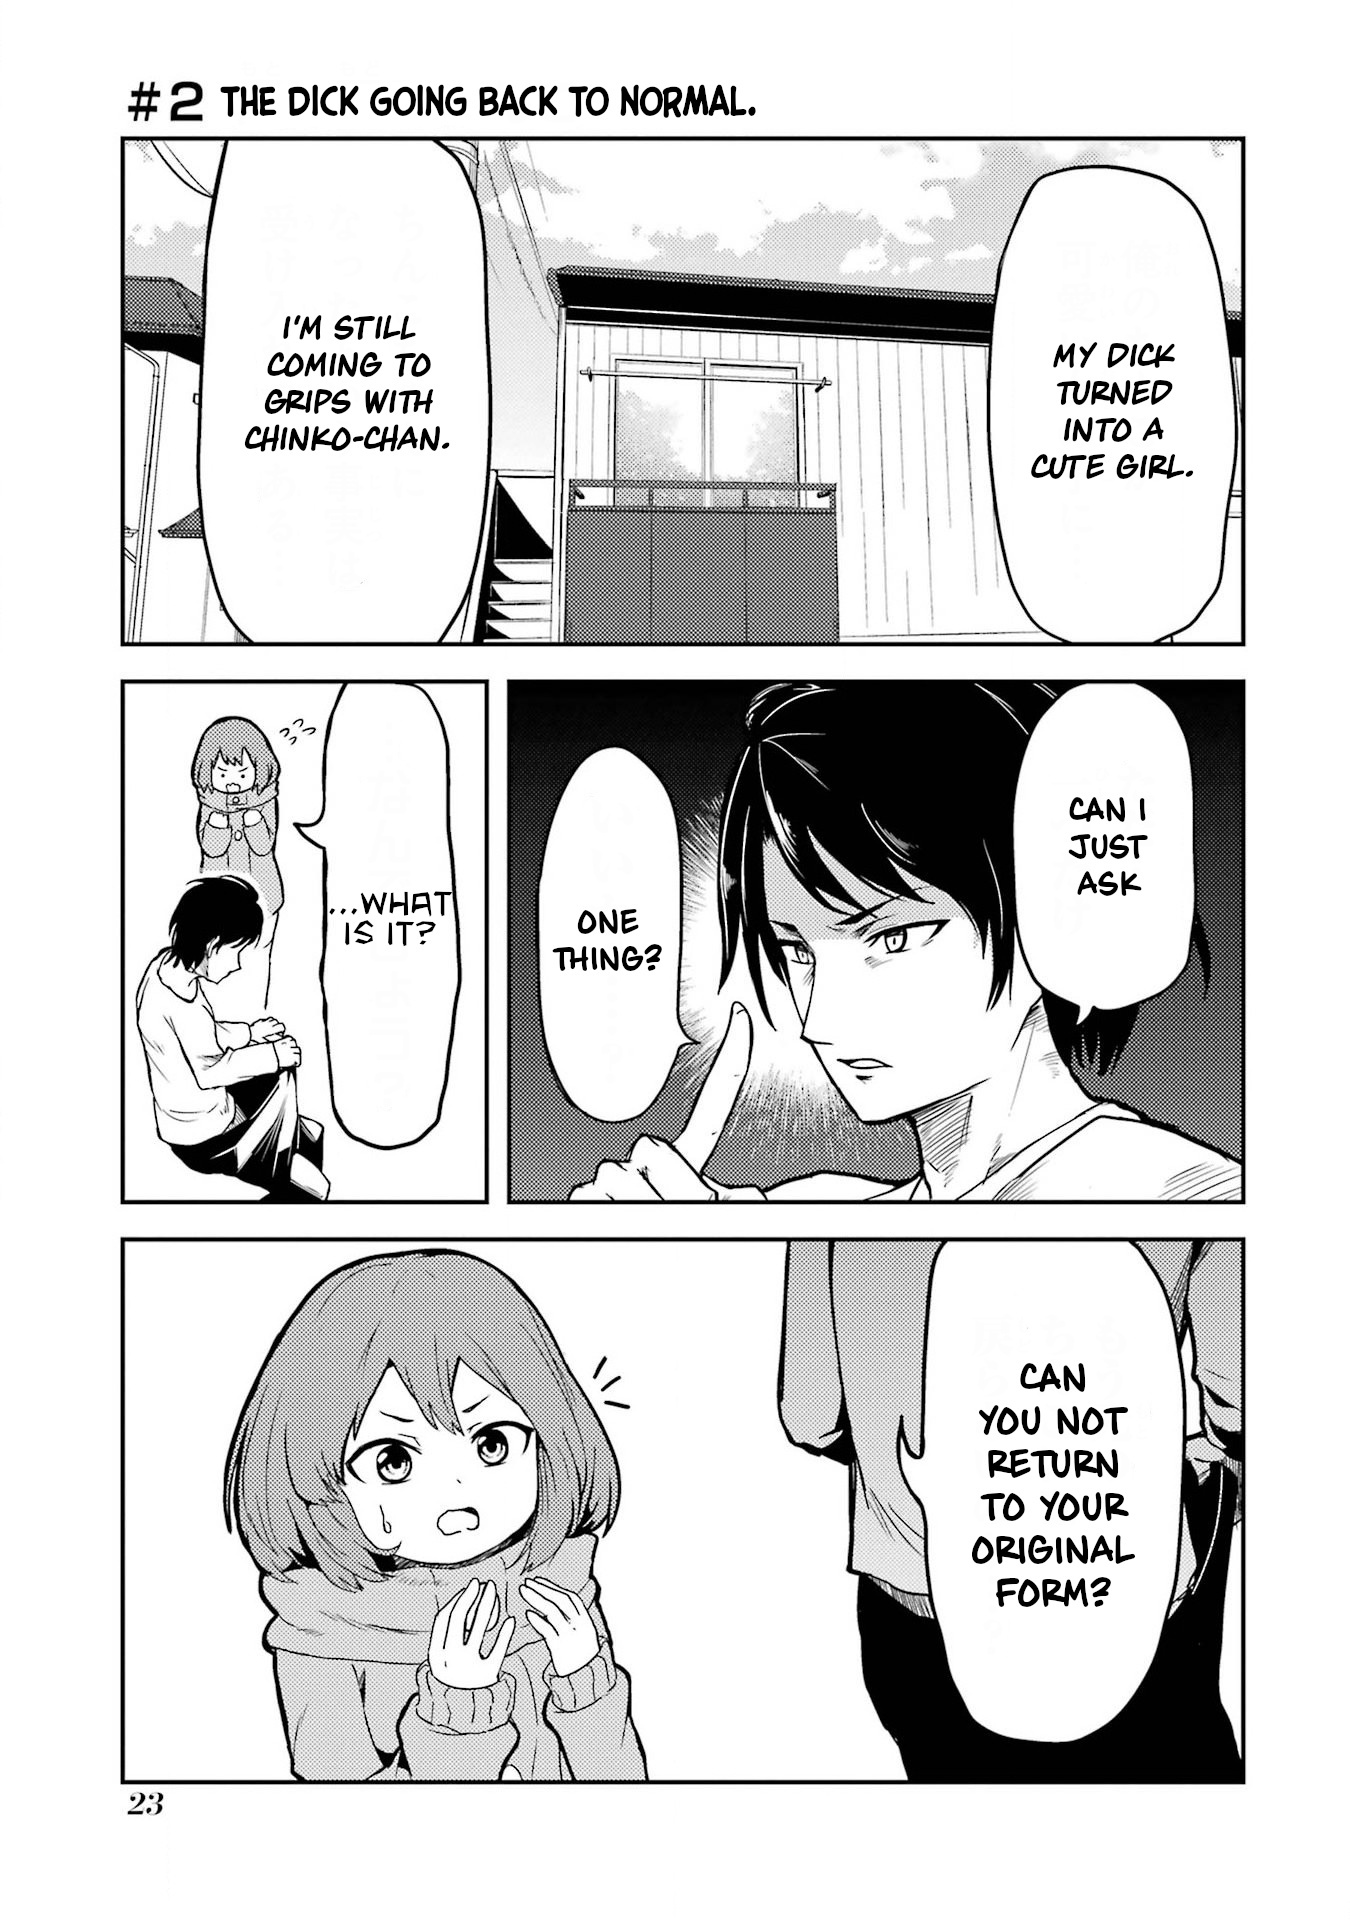 Turns Out My Dick Was A Cute Girl Vol.1 Chapter 2: The Dick Going Back To Normal. - Picture 1